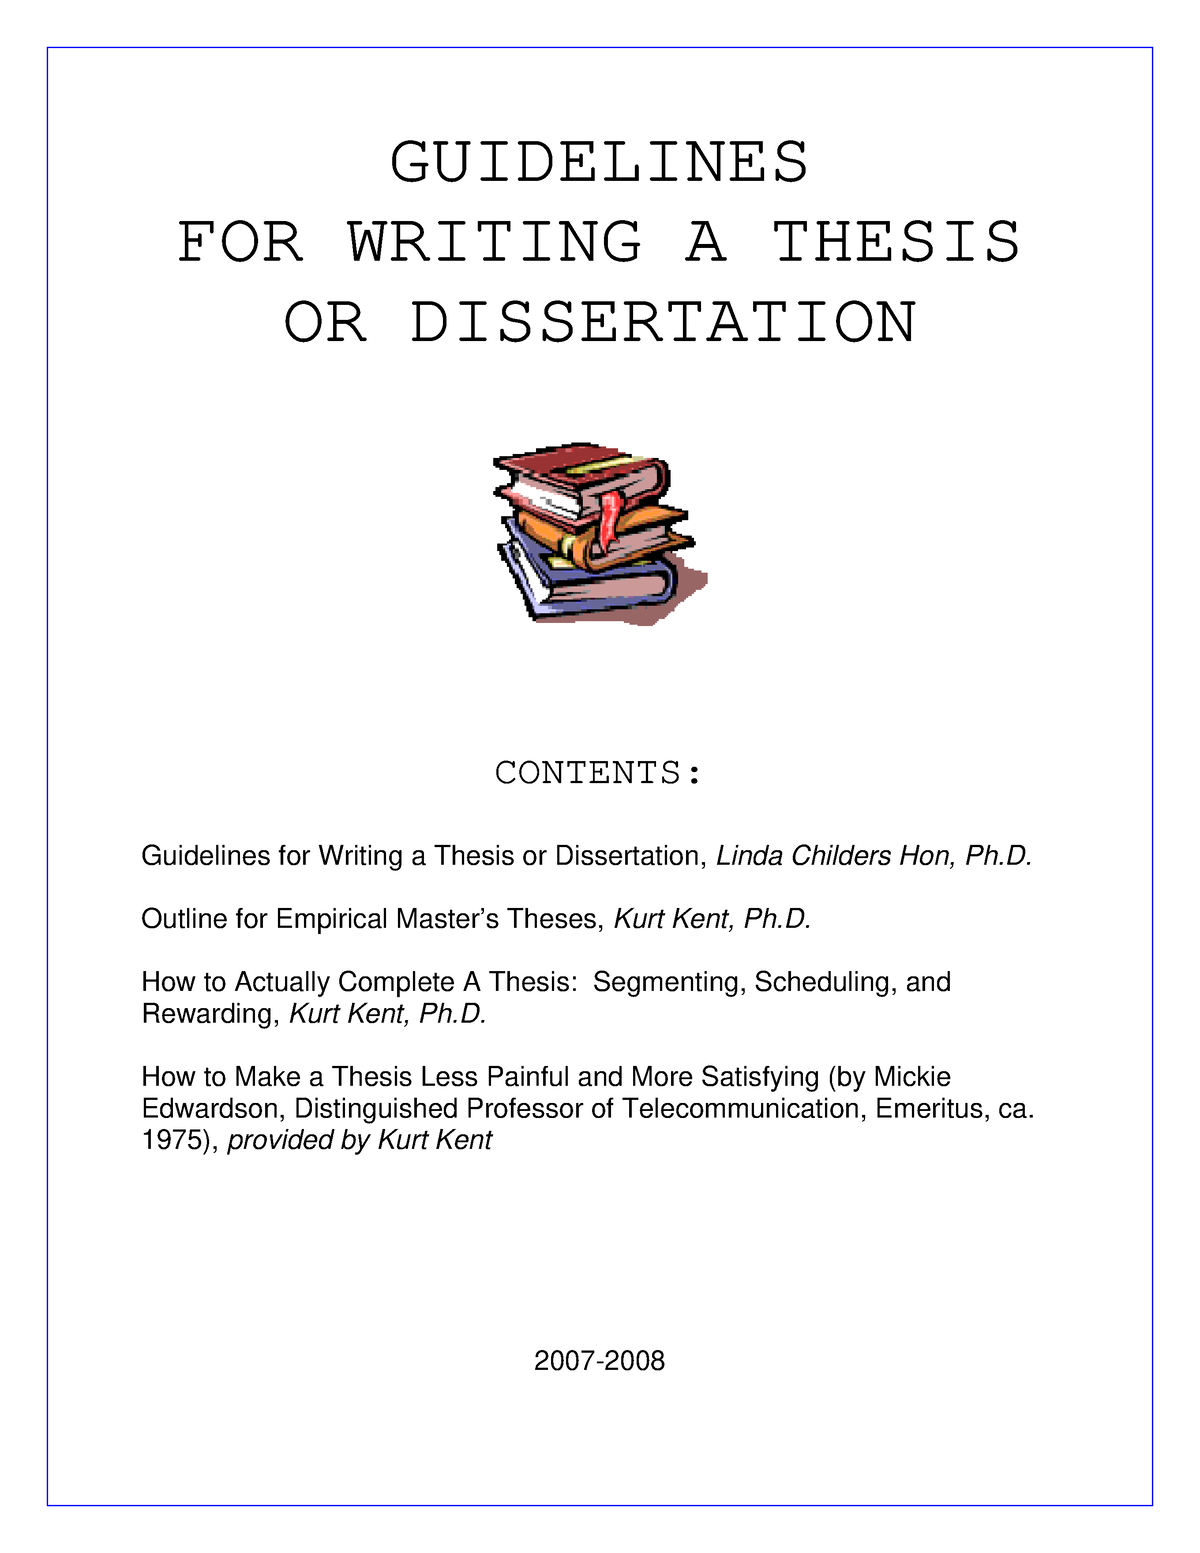 ku thesis guidelines